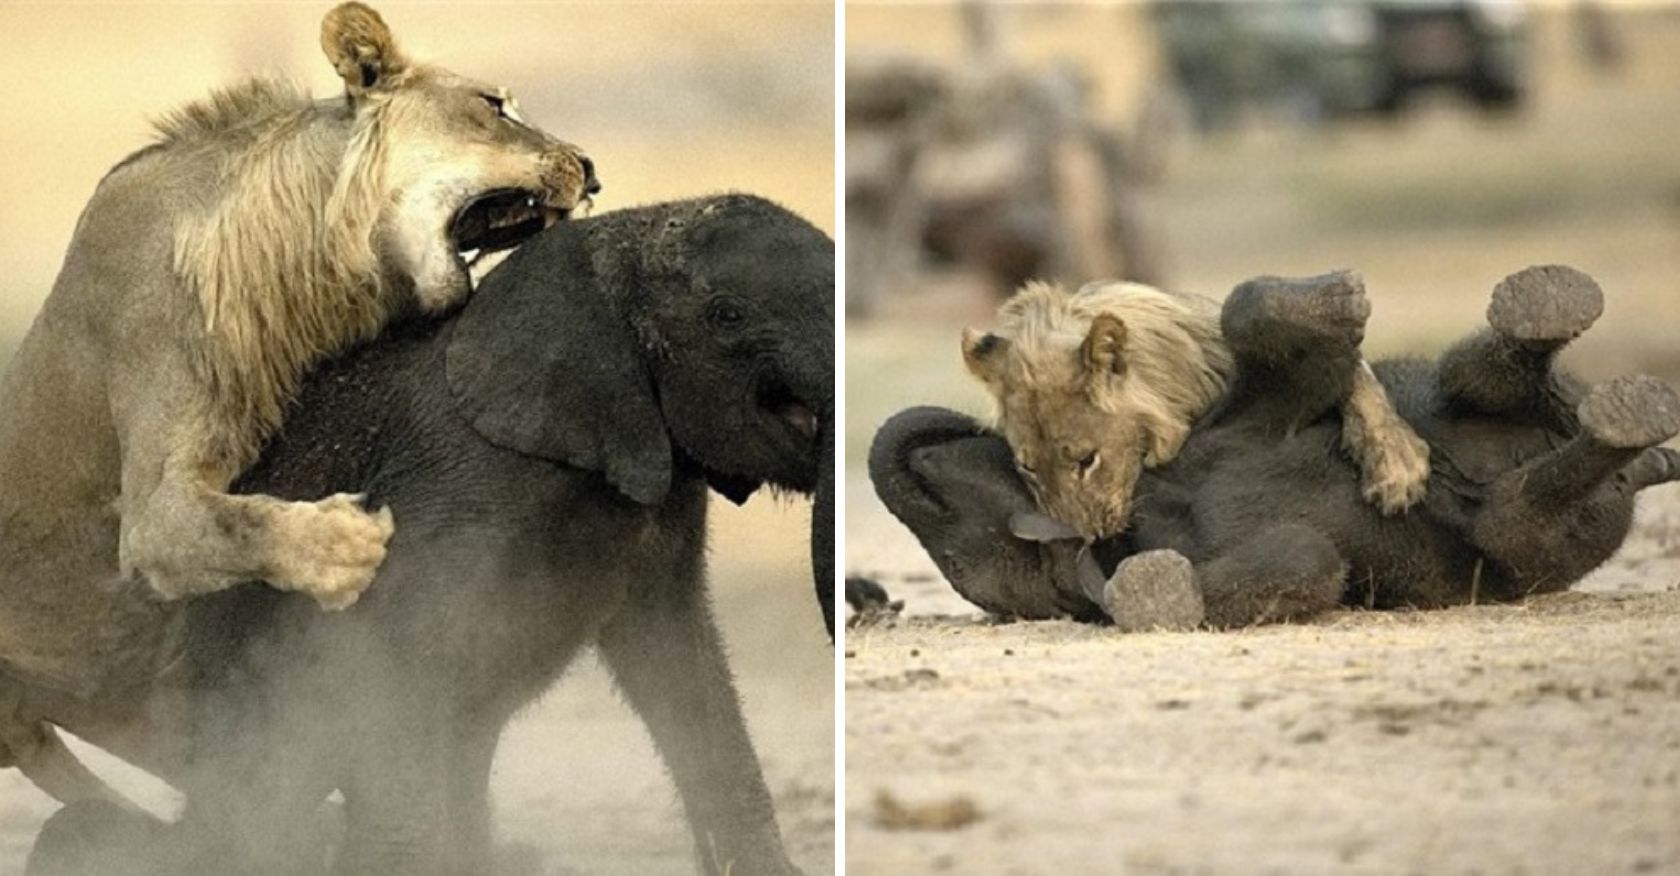 Poor baby elephant died tragically under the lion's jaws